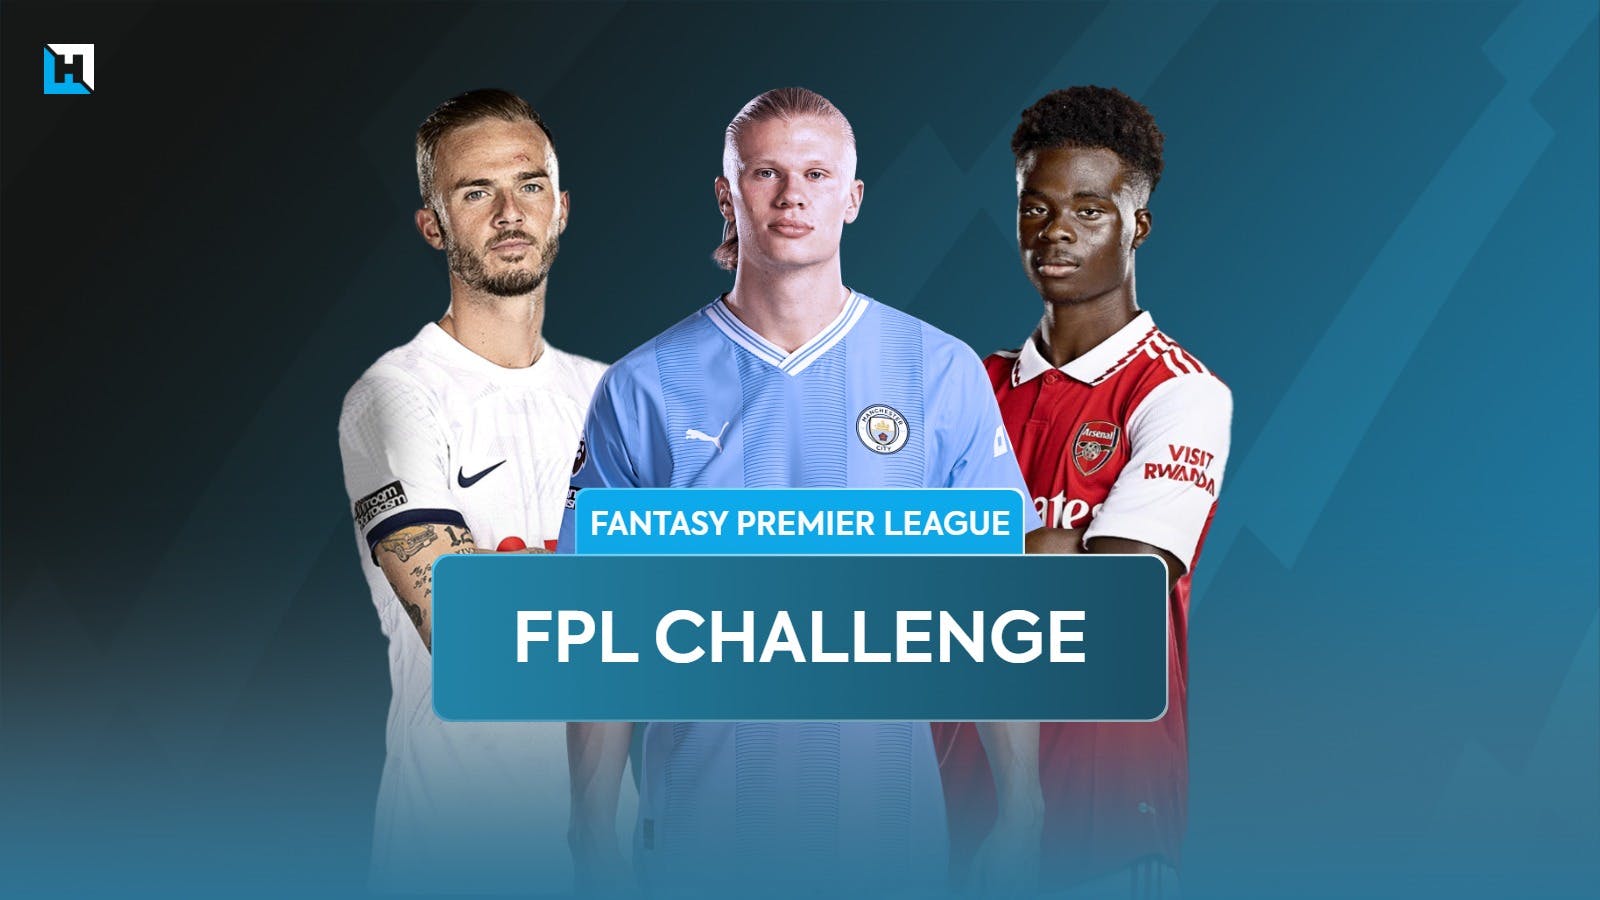 Everything you need to know about the new FPL Challenge game